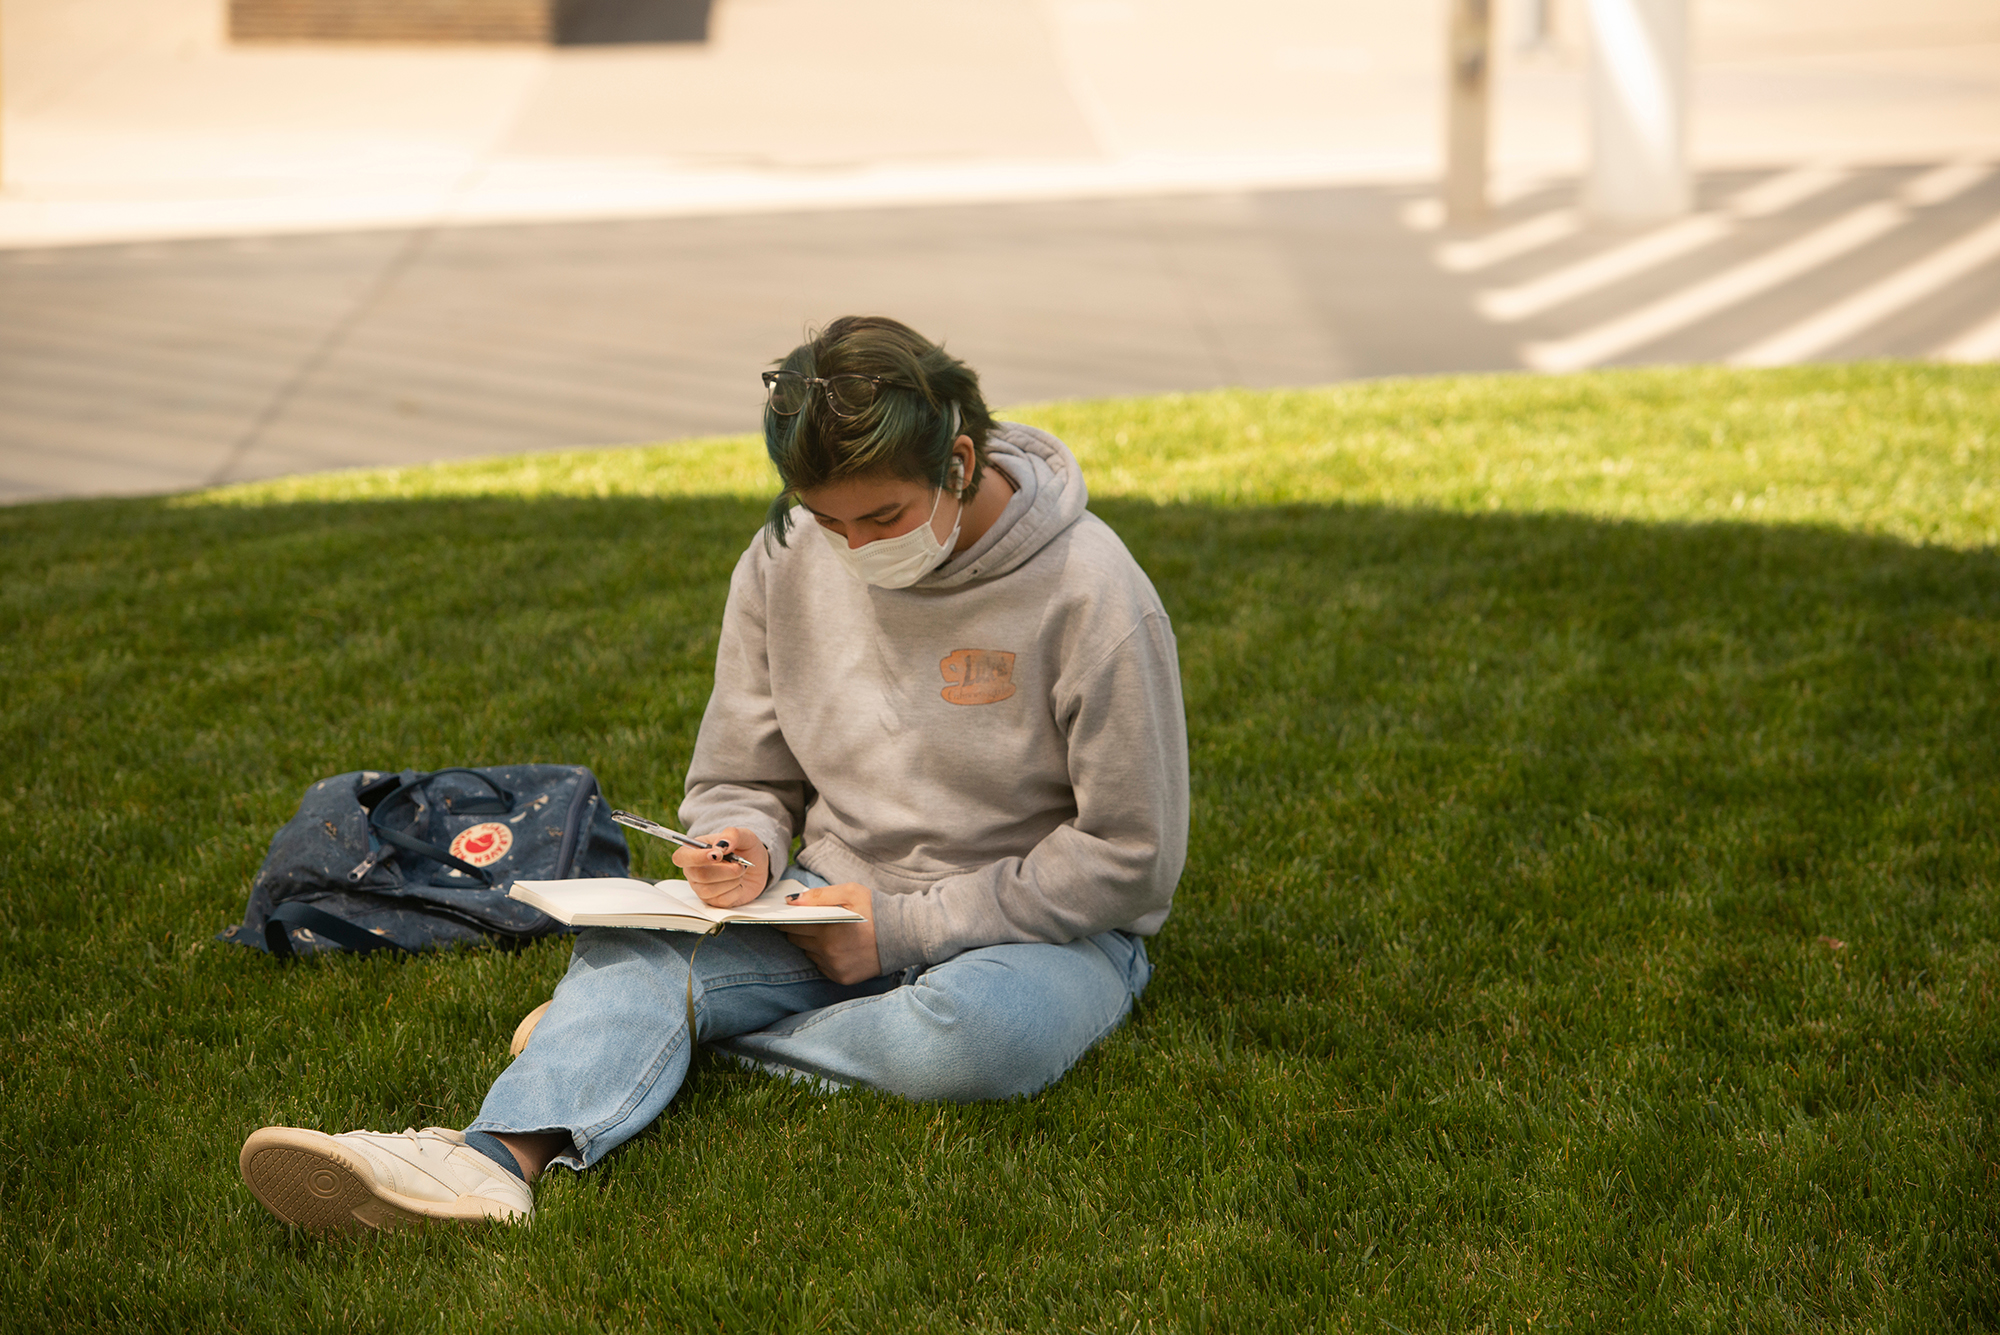 Student studying on the grass